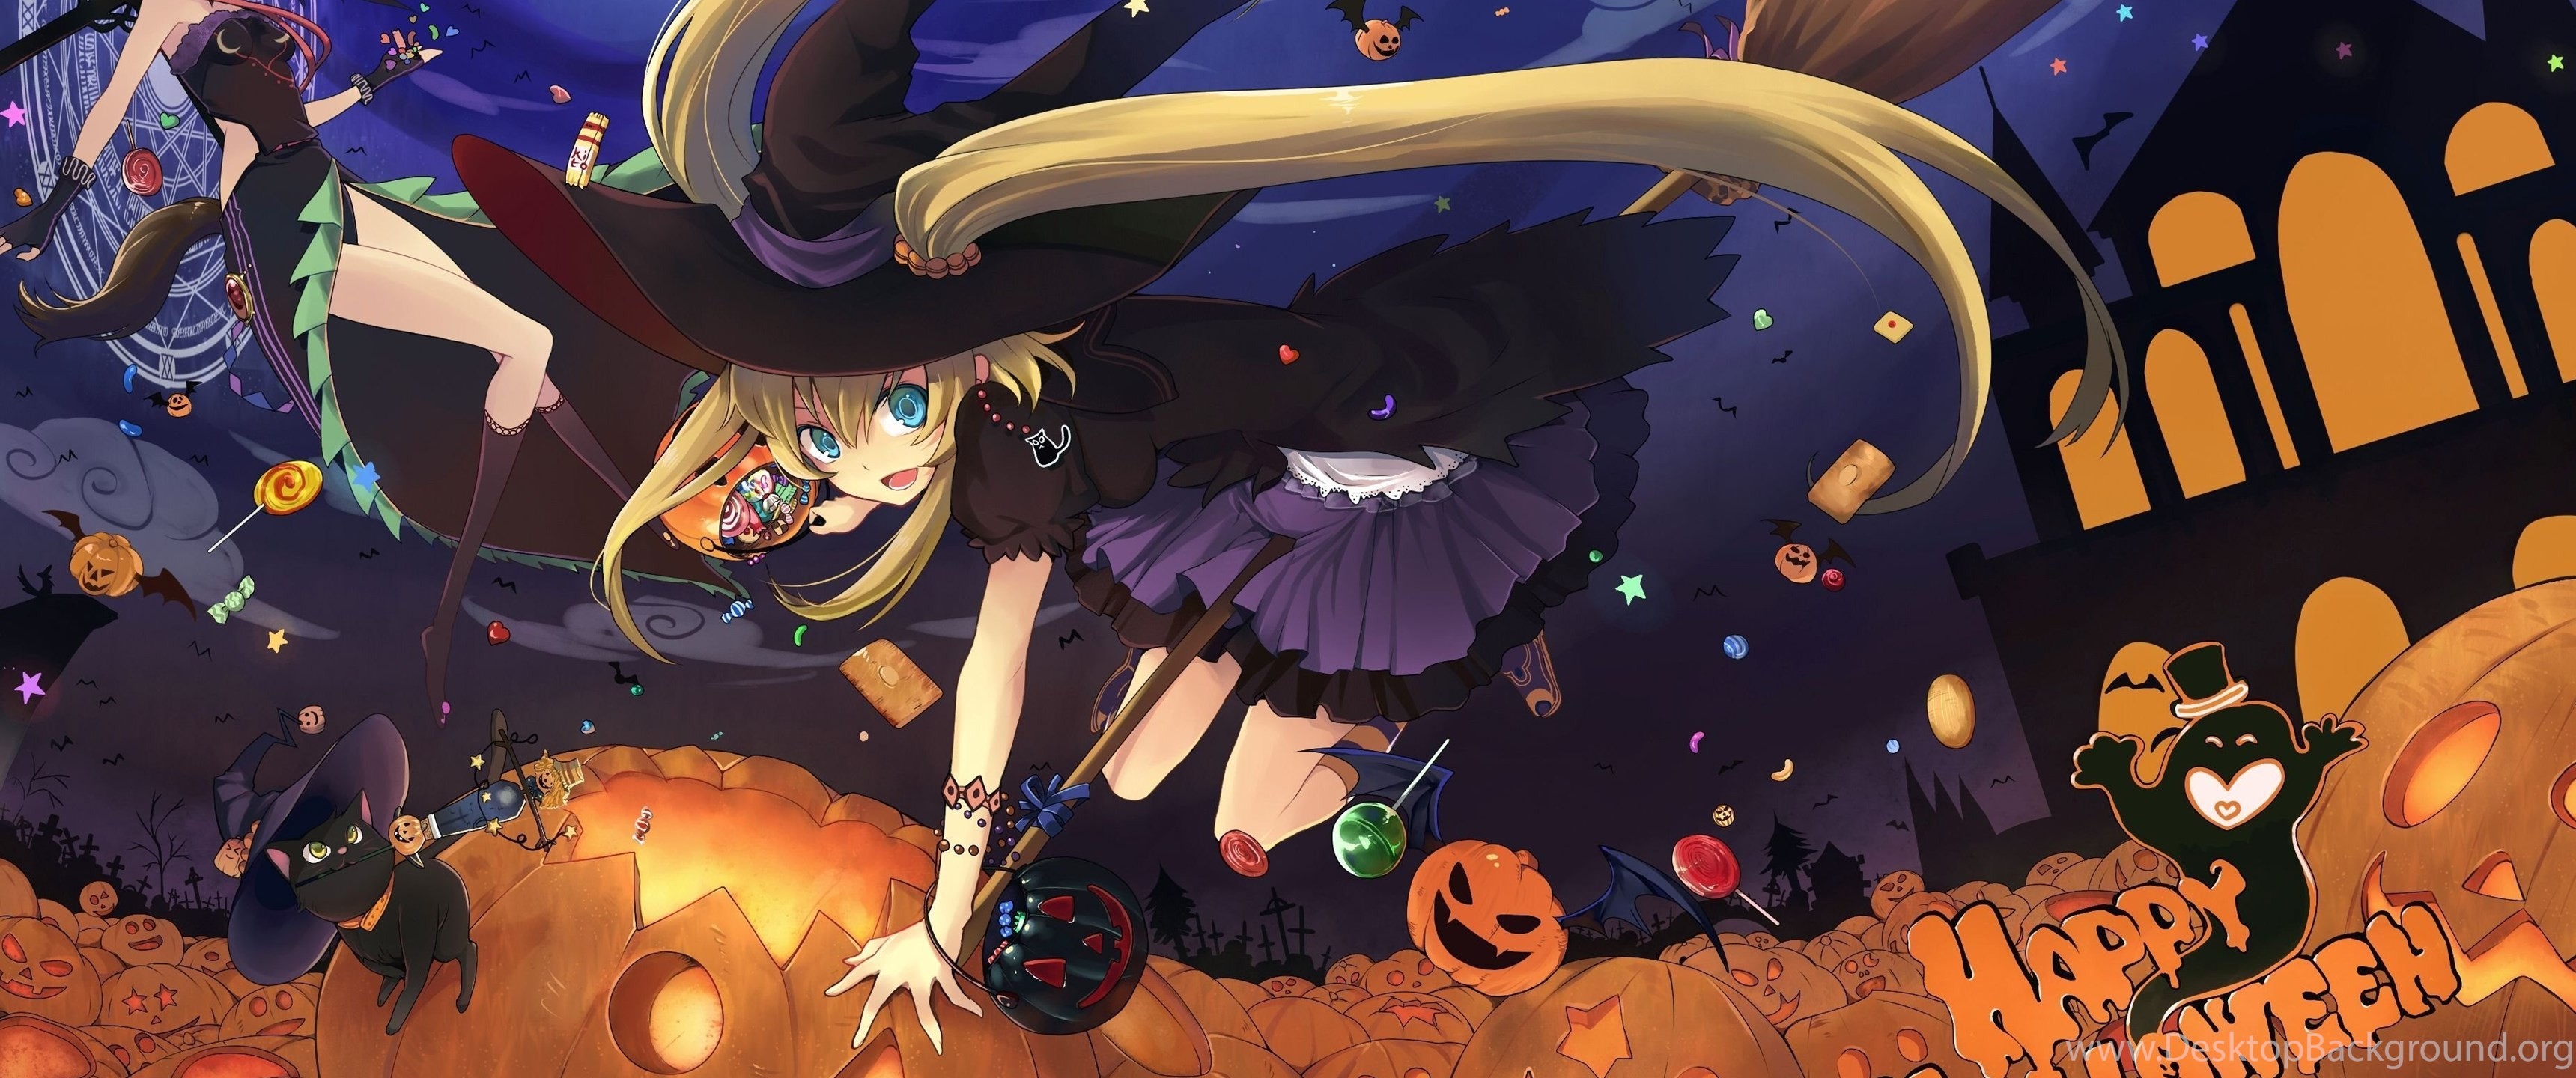 Cute Image Fo Tenkyoii Anime Halloween Wallpaper Background, Kawaii  Halloween Picture Background Image And Wallpaper for Free Download